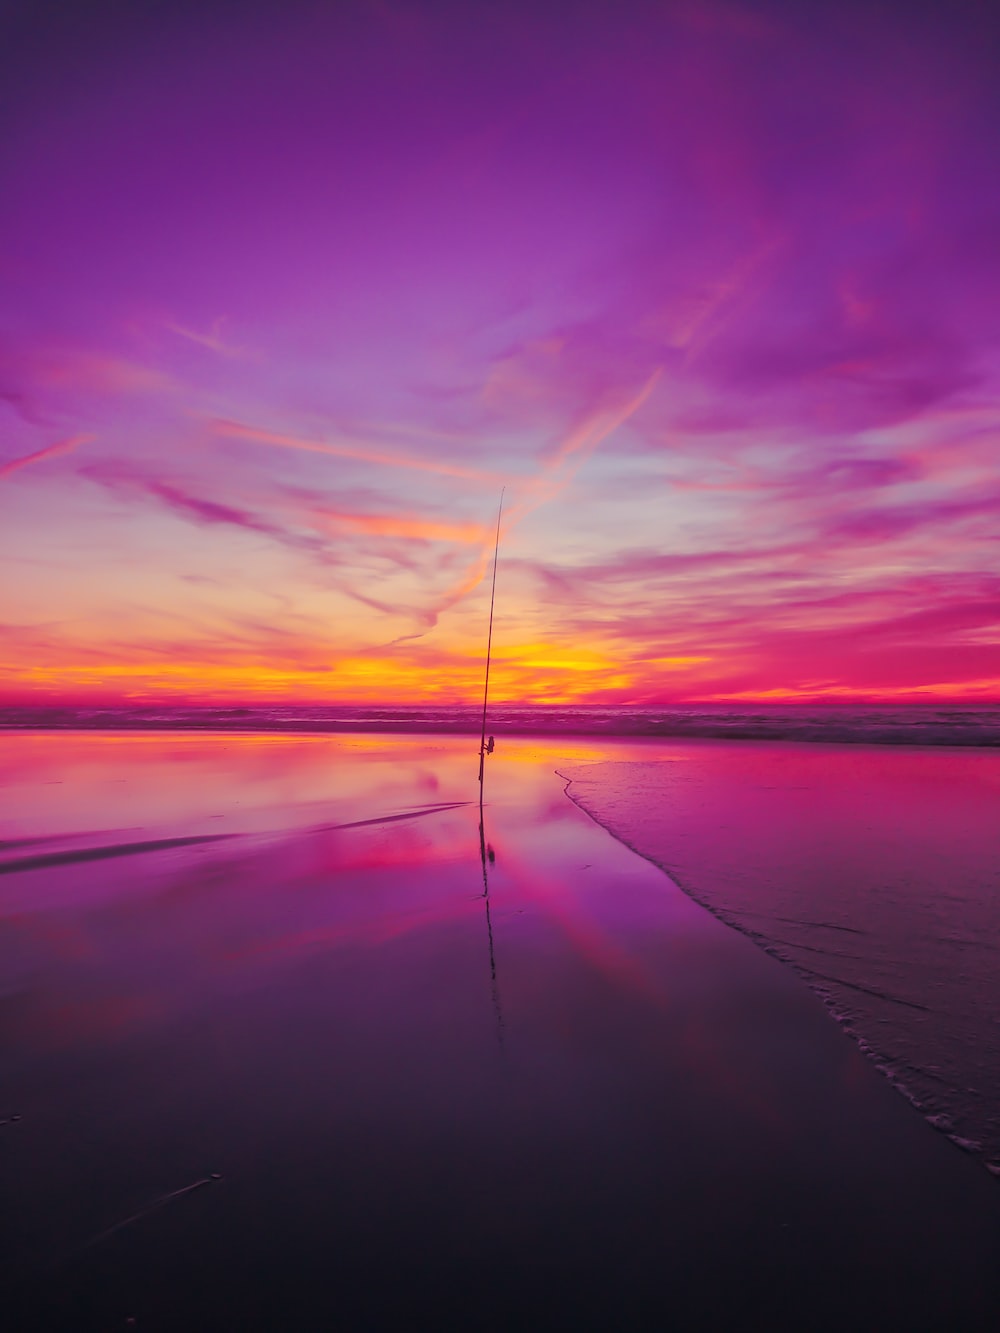 Purple Sunset Picture [HQ]. Download Free Image